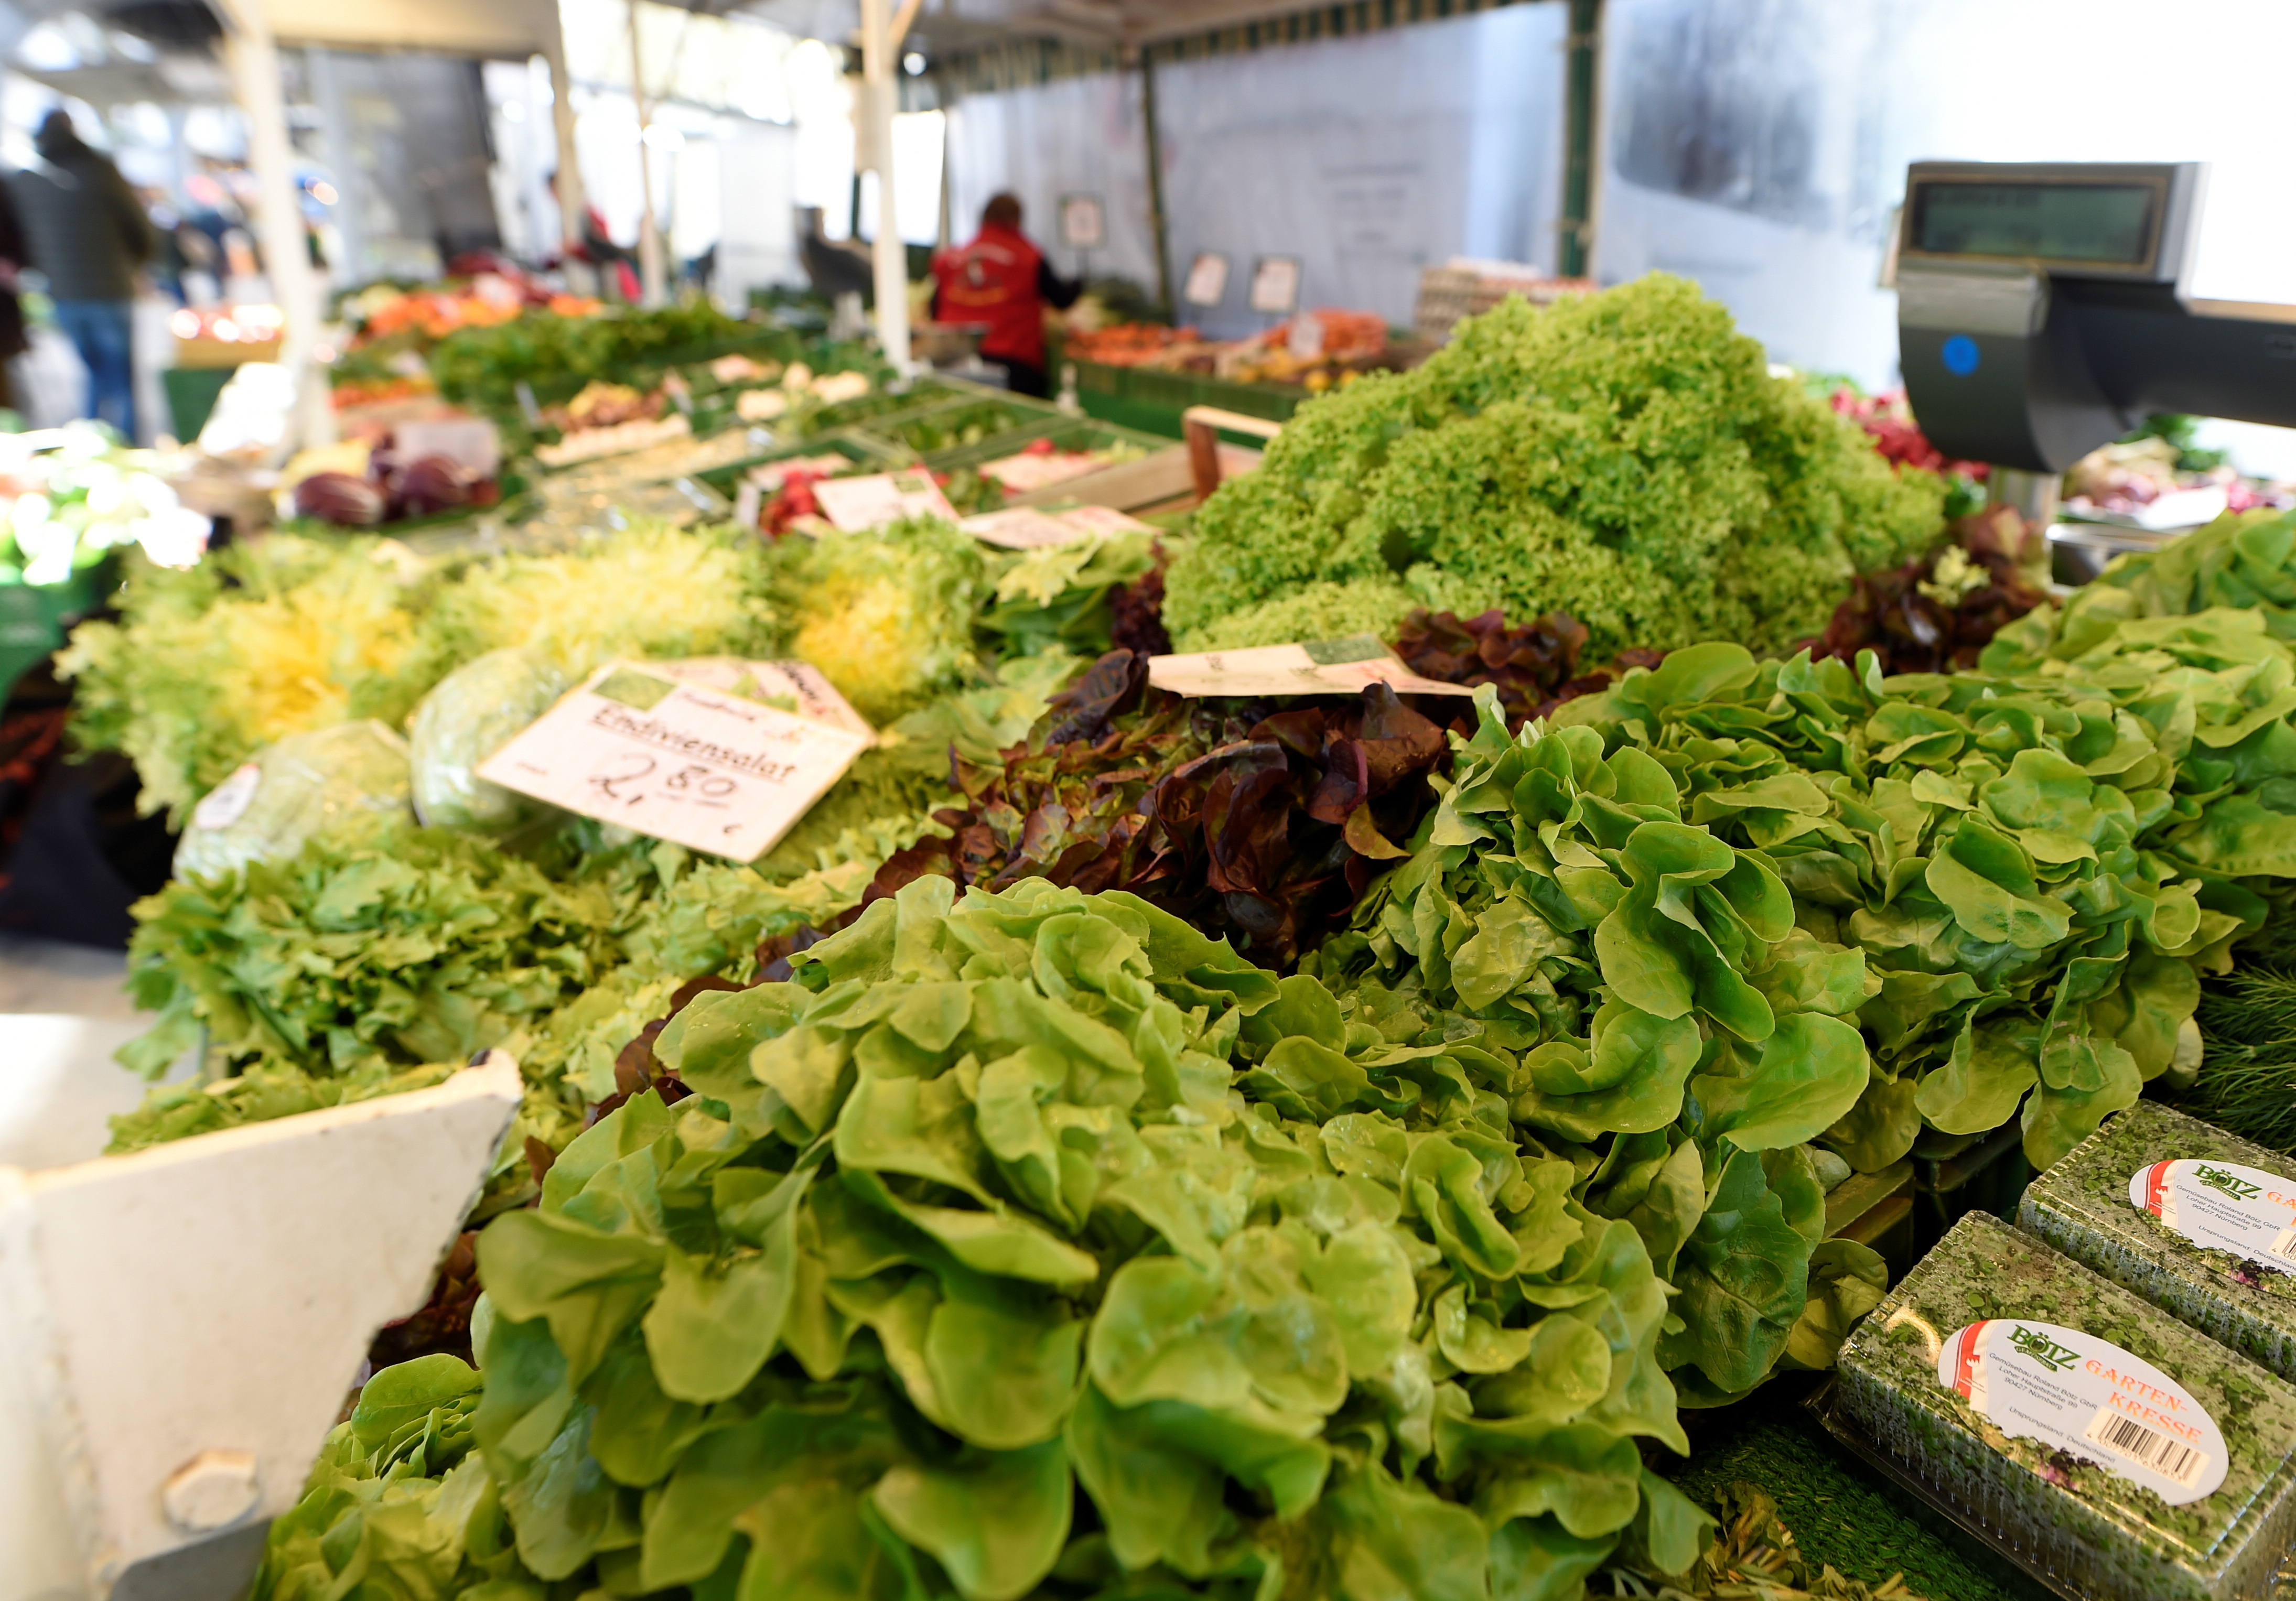 Salads and vegetables are offered on a farmer's market during the outbreak of coronavirus disease (COVID-19) in Hamburg